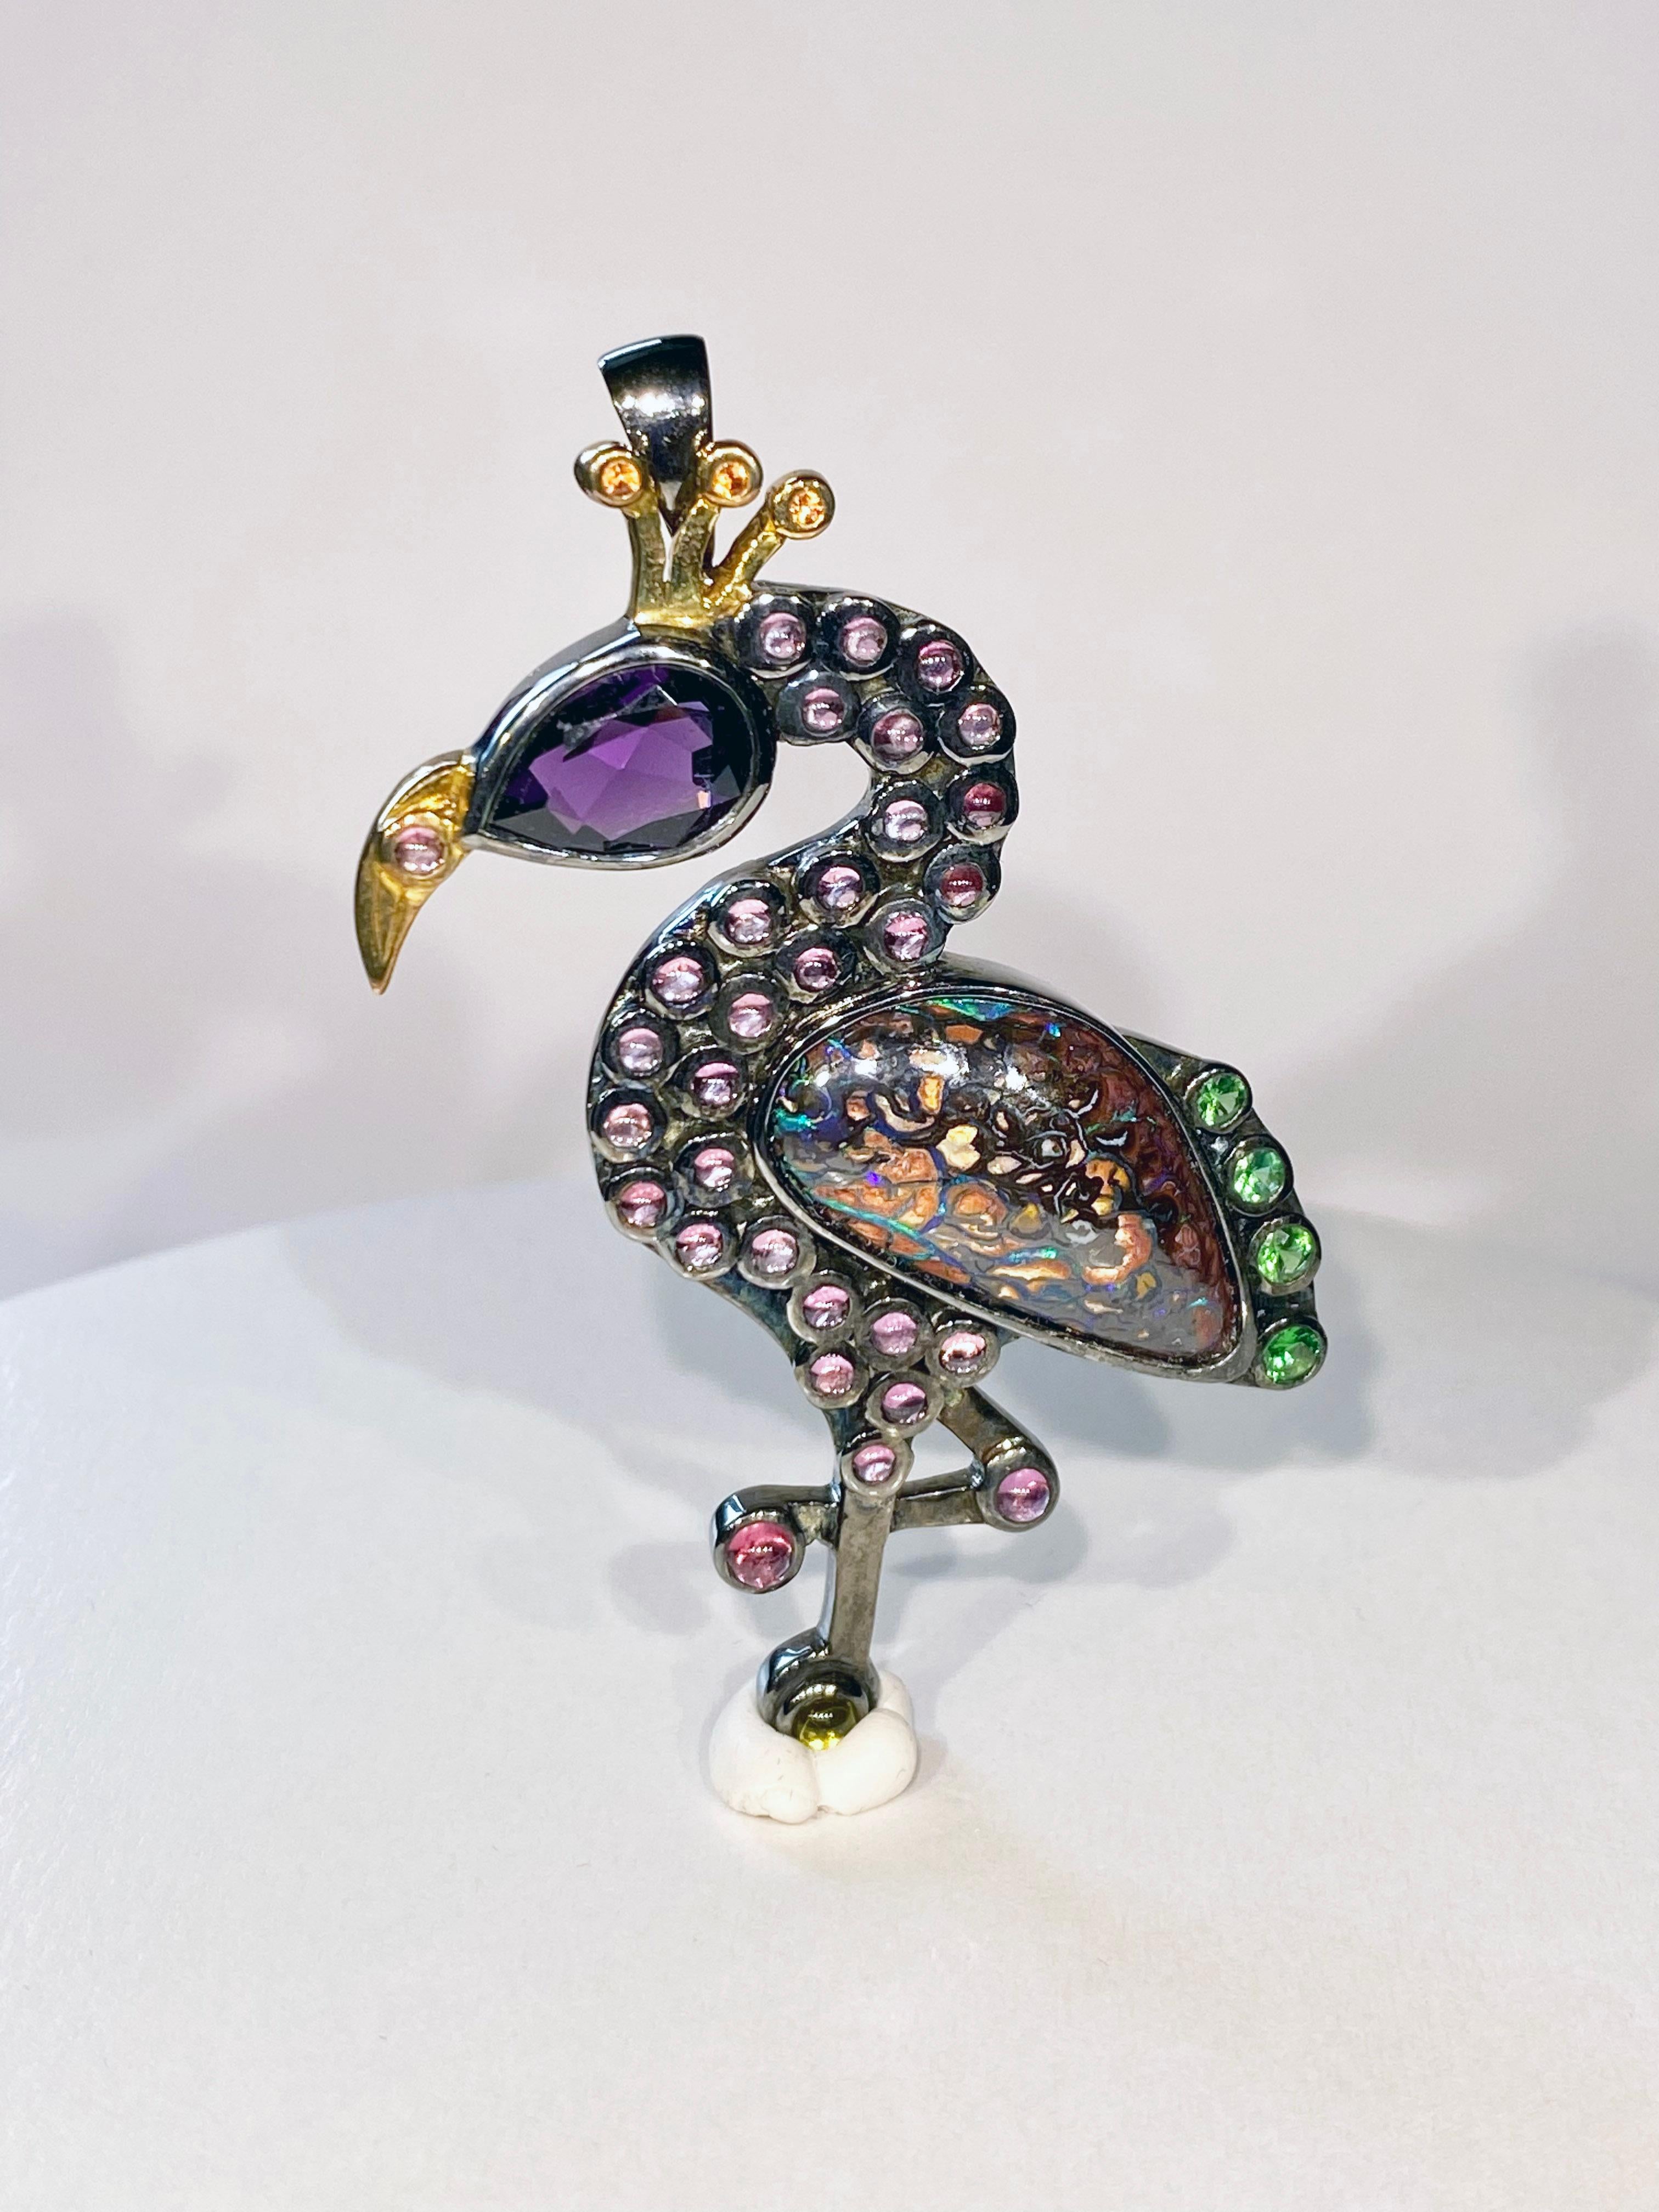 A Flamingo Pendant/Brooch in Blackened Silver with 18kt Gold Plating, set with Australian Boulder Opal Body, A Pear Cut Amethyst Head, Round Yellow Sapphire Crest Ornaments, Pink Tourmaline Cabochons & Tsavorite Garnet Rounds.
This Jewel can be worn